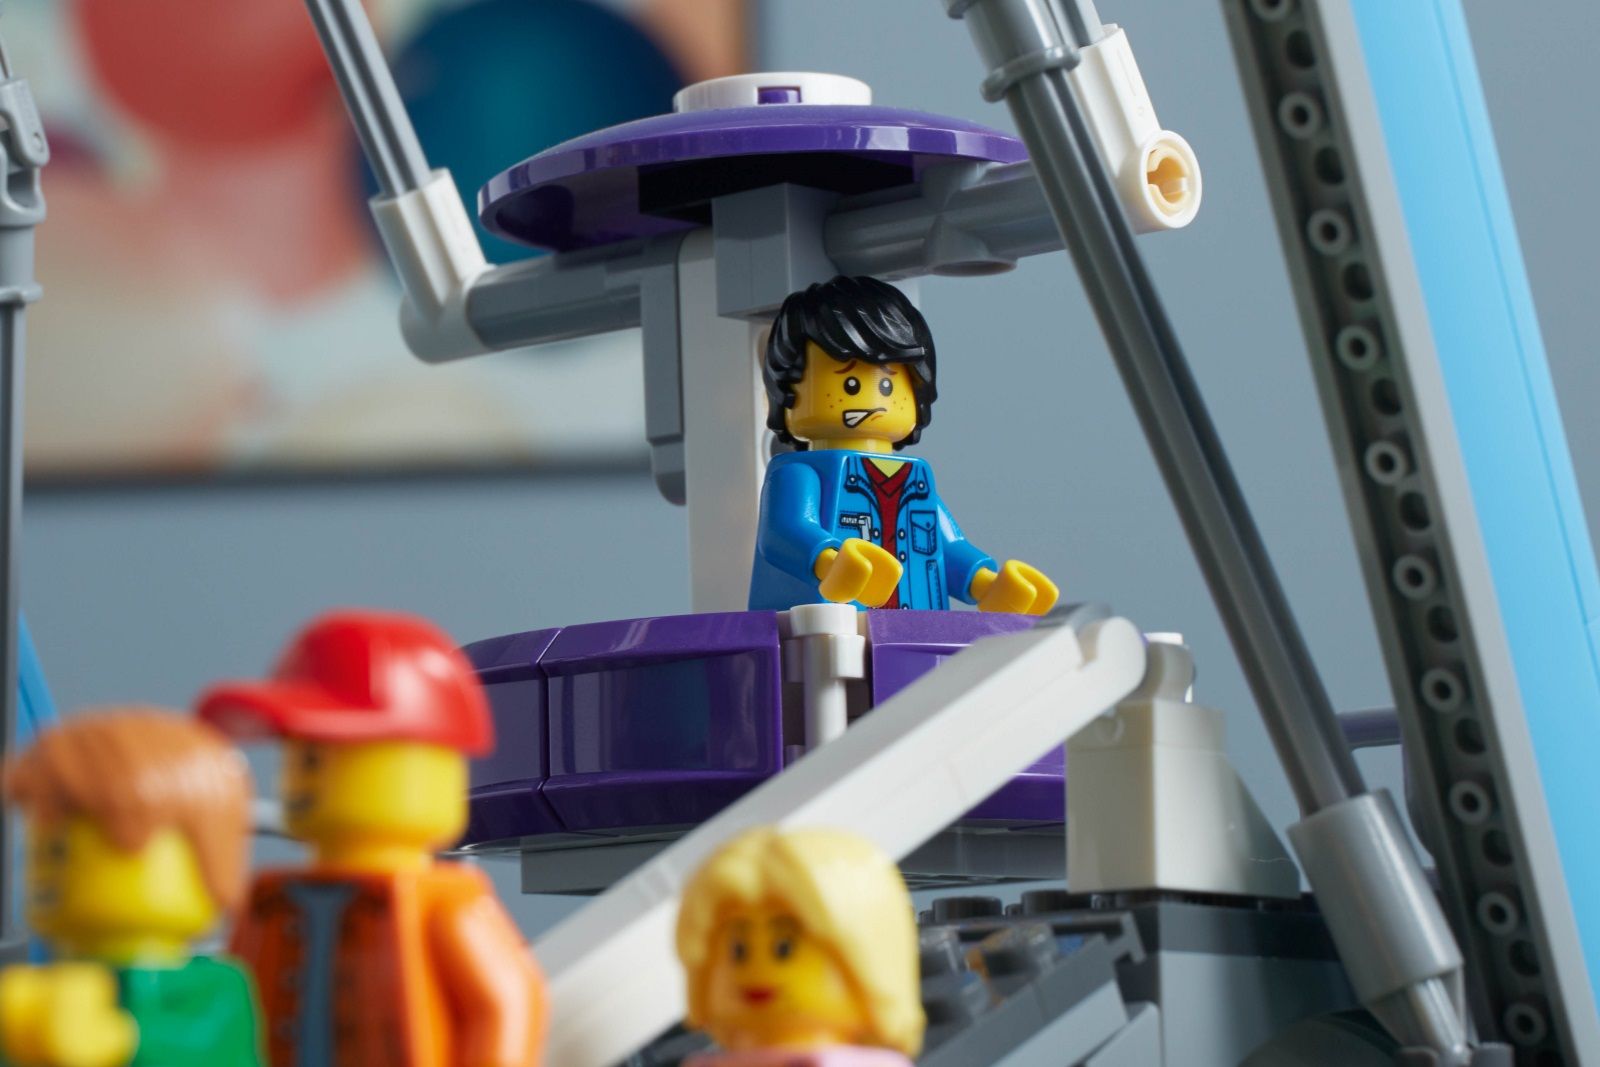 This roller coaster is one of the biggest Lego sets ever - and it can even be powered image 4